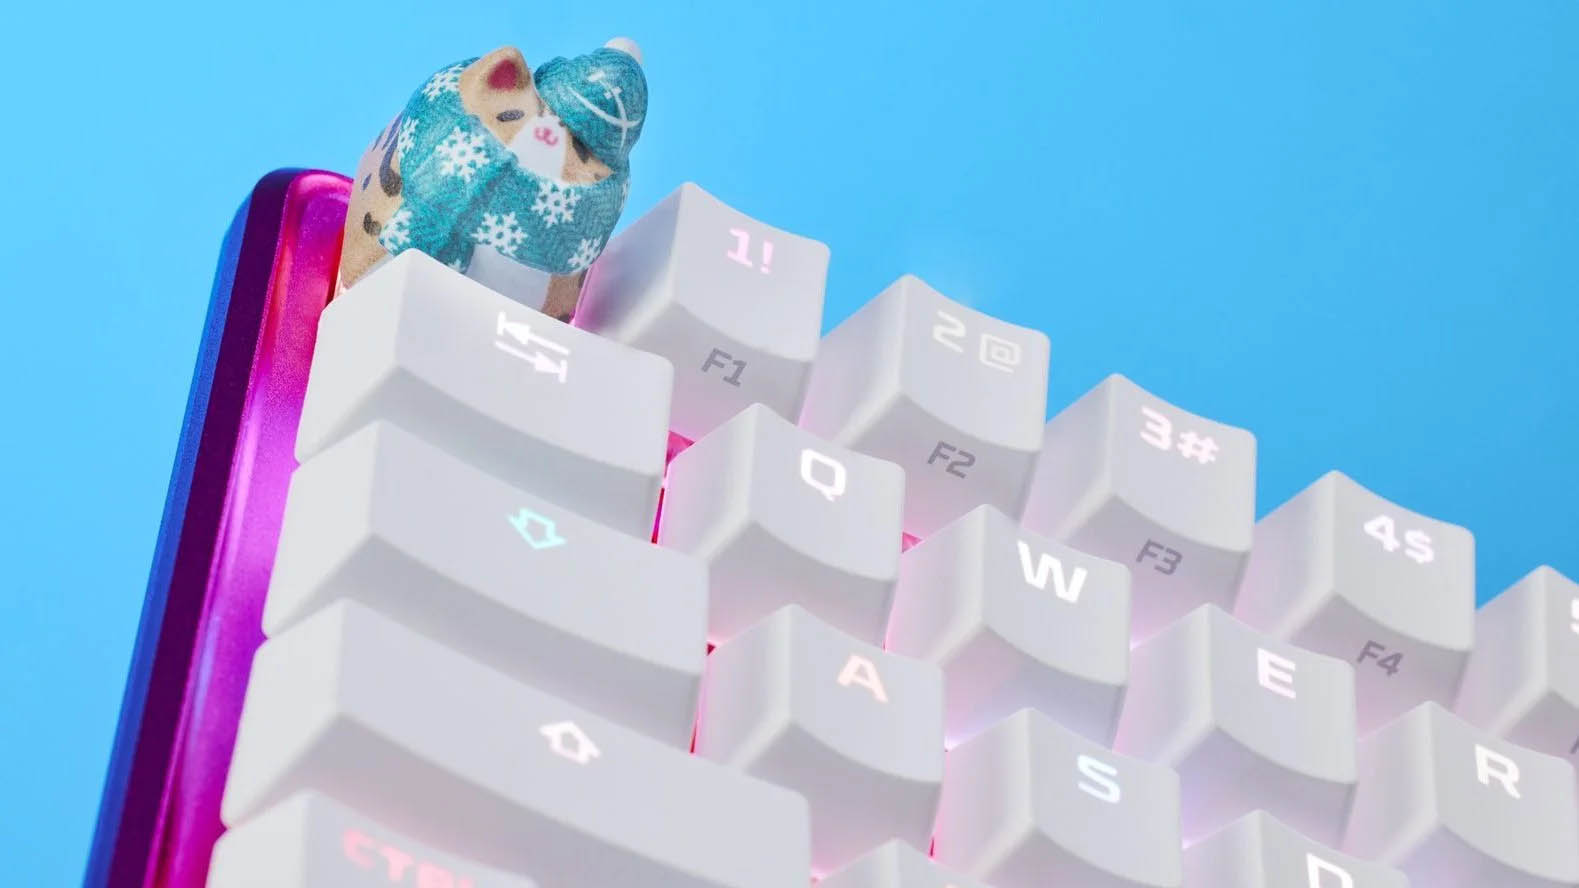 HyperX Cozy Cat Keycap Coco goes on sale January 26 for a limited time